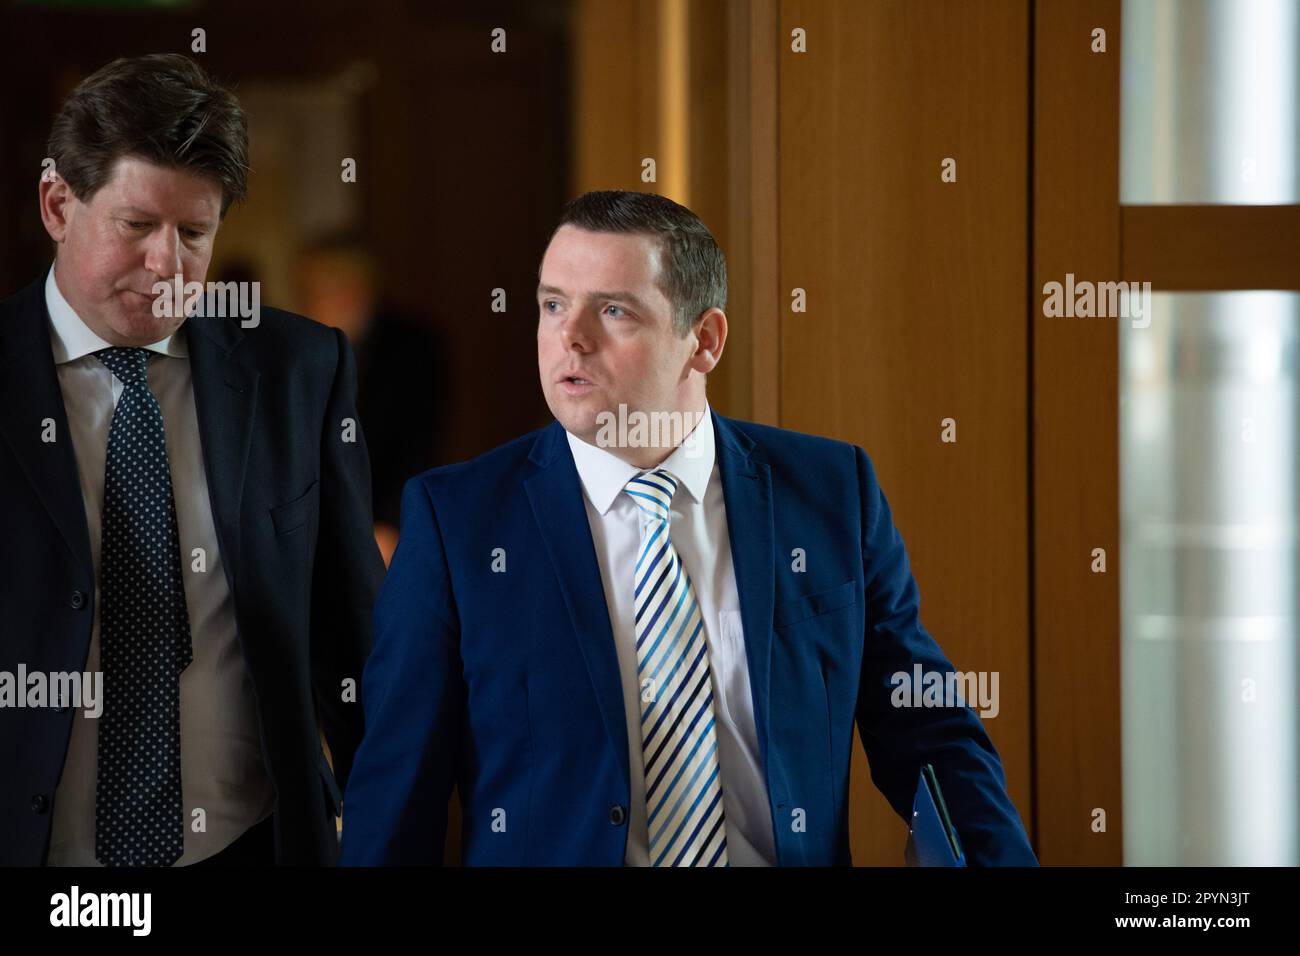 Edinburgh, Scotland, UK. 4th May, 2023. PICTURED: Douglas Ross MSP MP, Scottish Tory Leader. Scenes inside Holyrood showing the corridor and chamber views of the MSPs at the weekly session of First Ministers Questions (FMQs). Credit: Colin D Fisher/CDFIMAGES.COM Credit: Colin Fisher/Alamy Live News Stock Photo